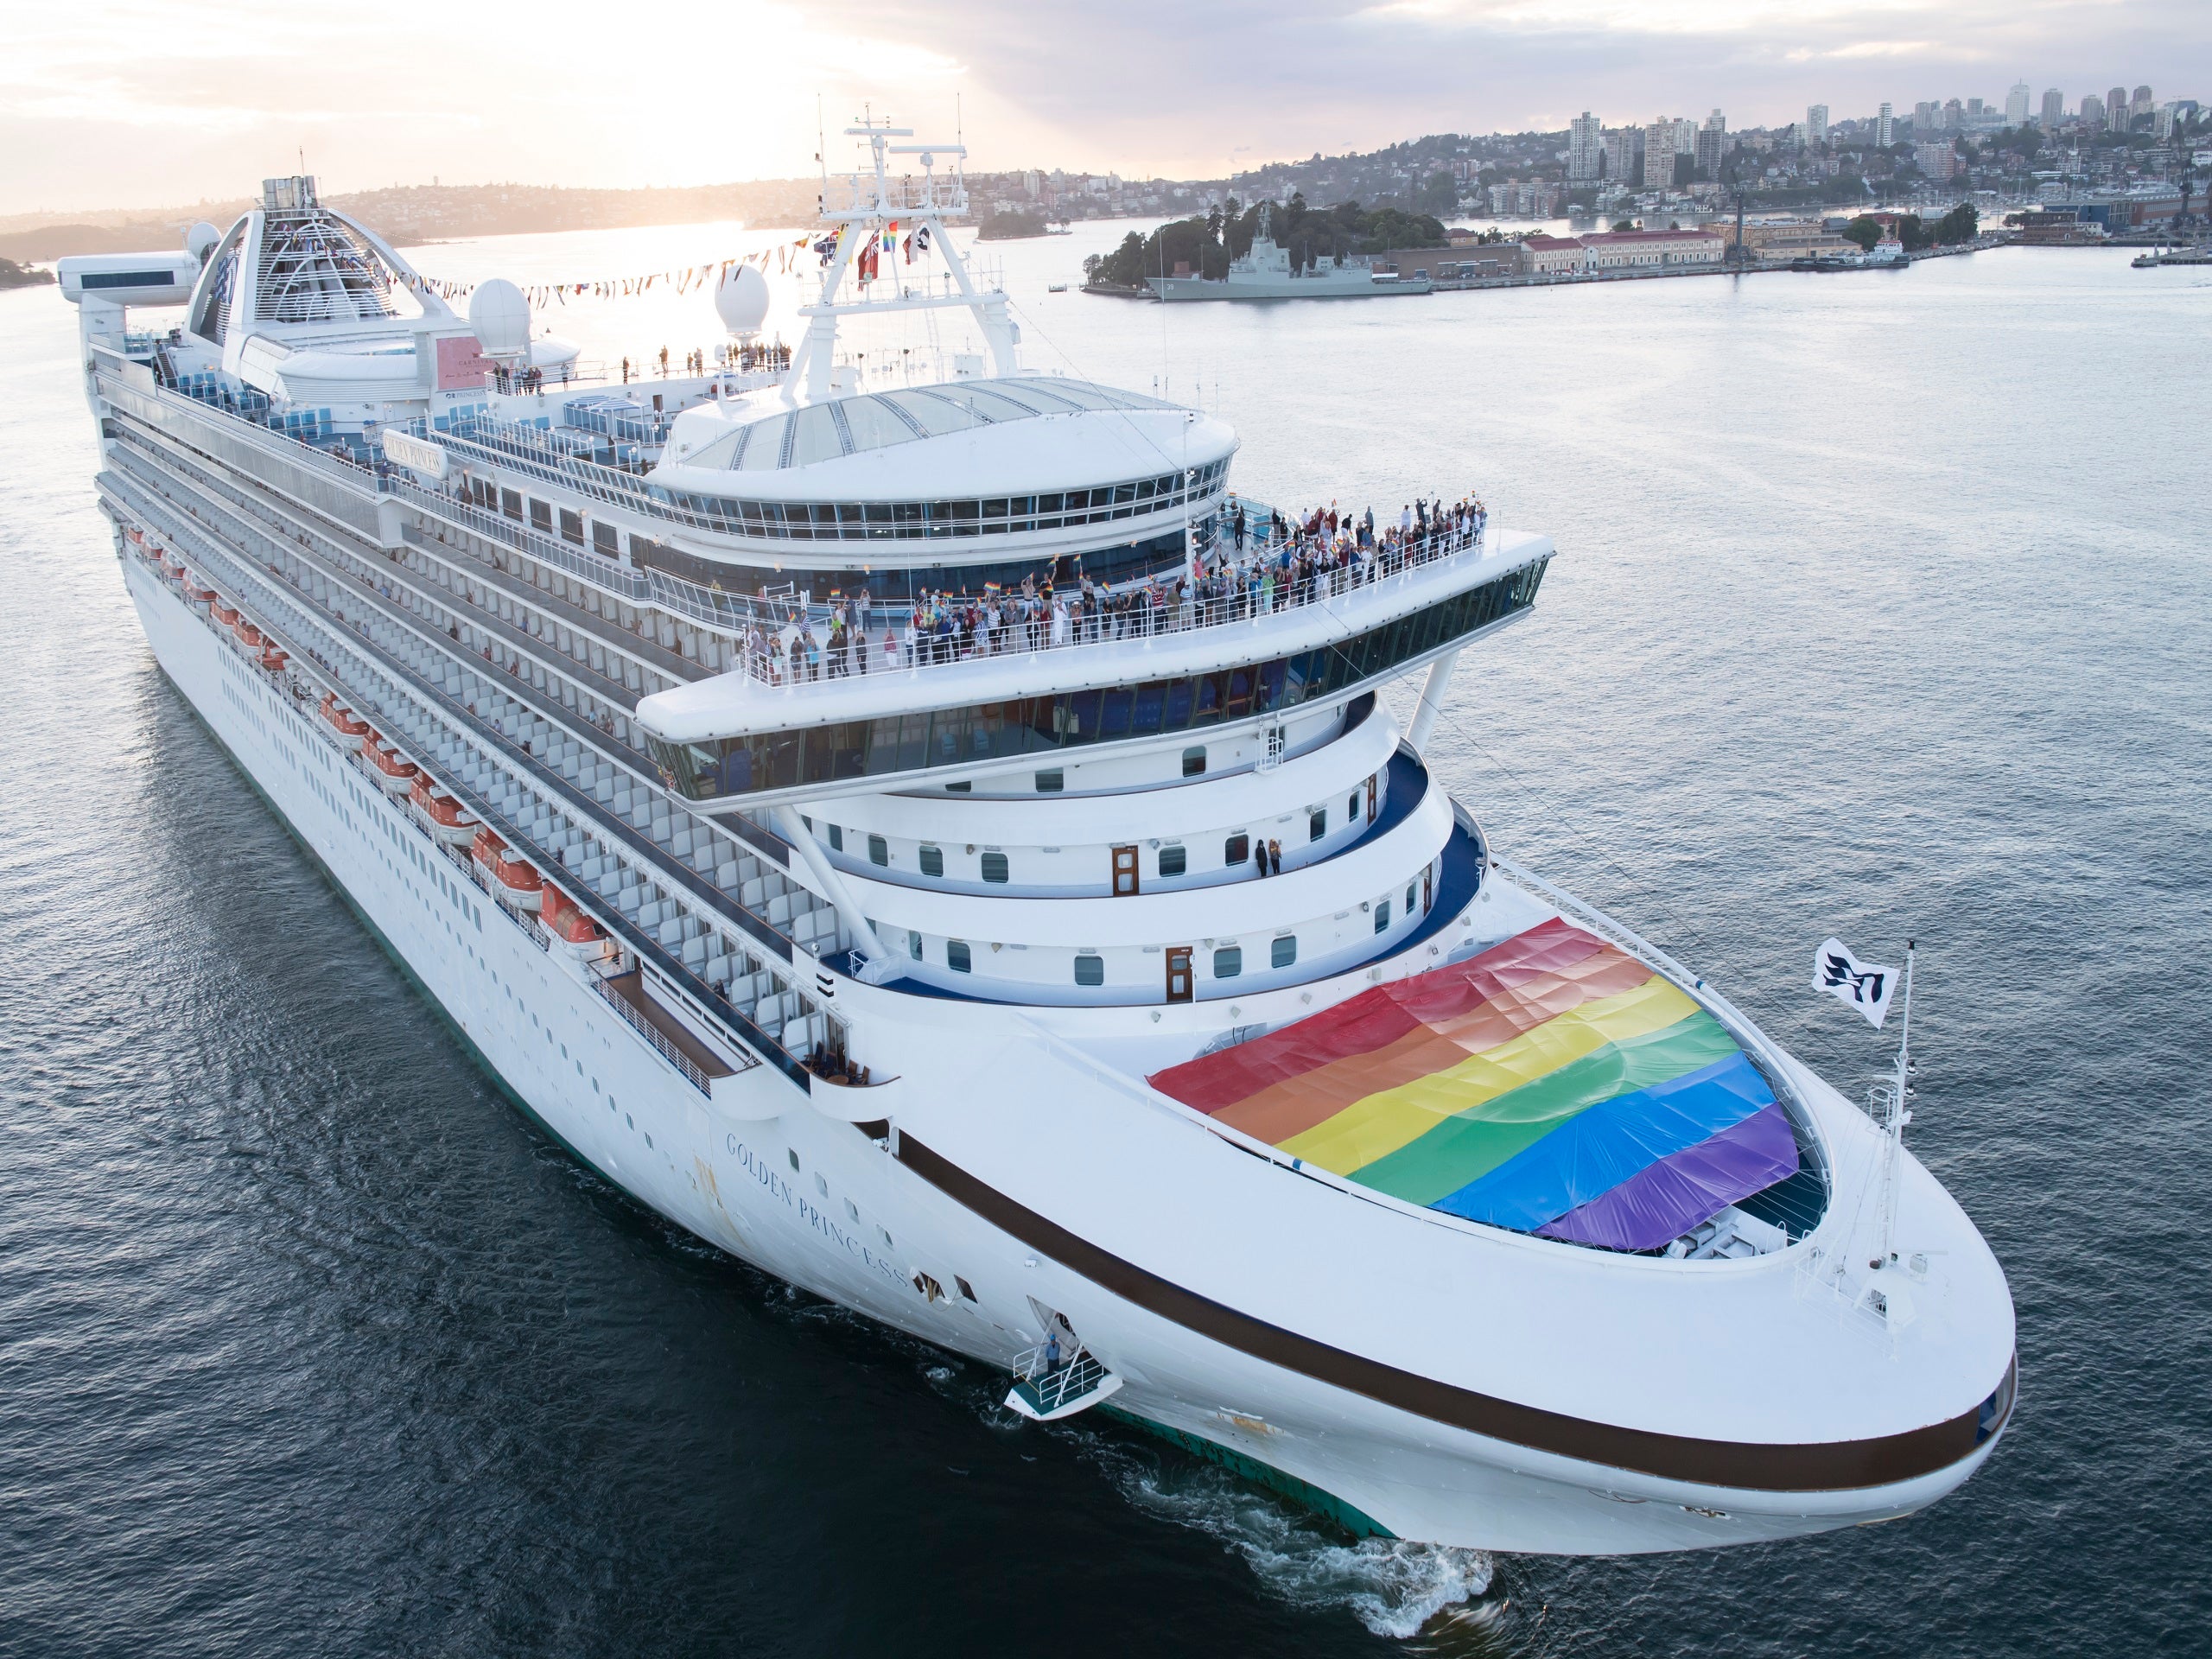 These LGBTQIA+ travel agencies can help you plan the perfect cruise